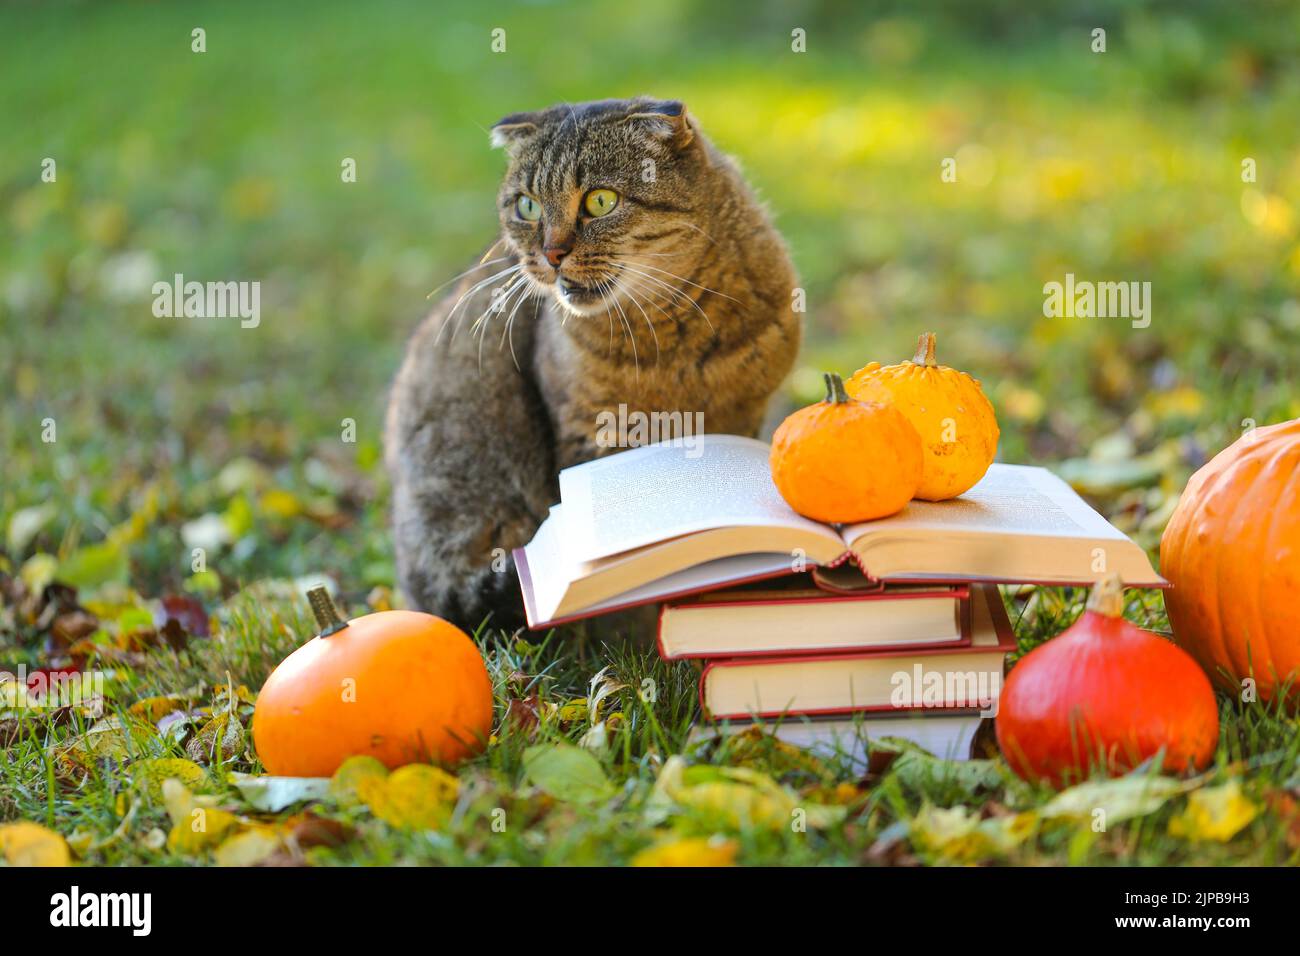 books and emotional cat in the autumn garden.Back to school. Scientist cat. Emotions of a cat.Autumn reading. Halloween stories, fairy tales and Stock Photo